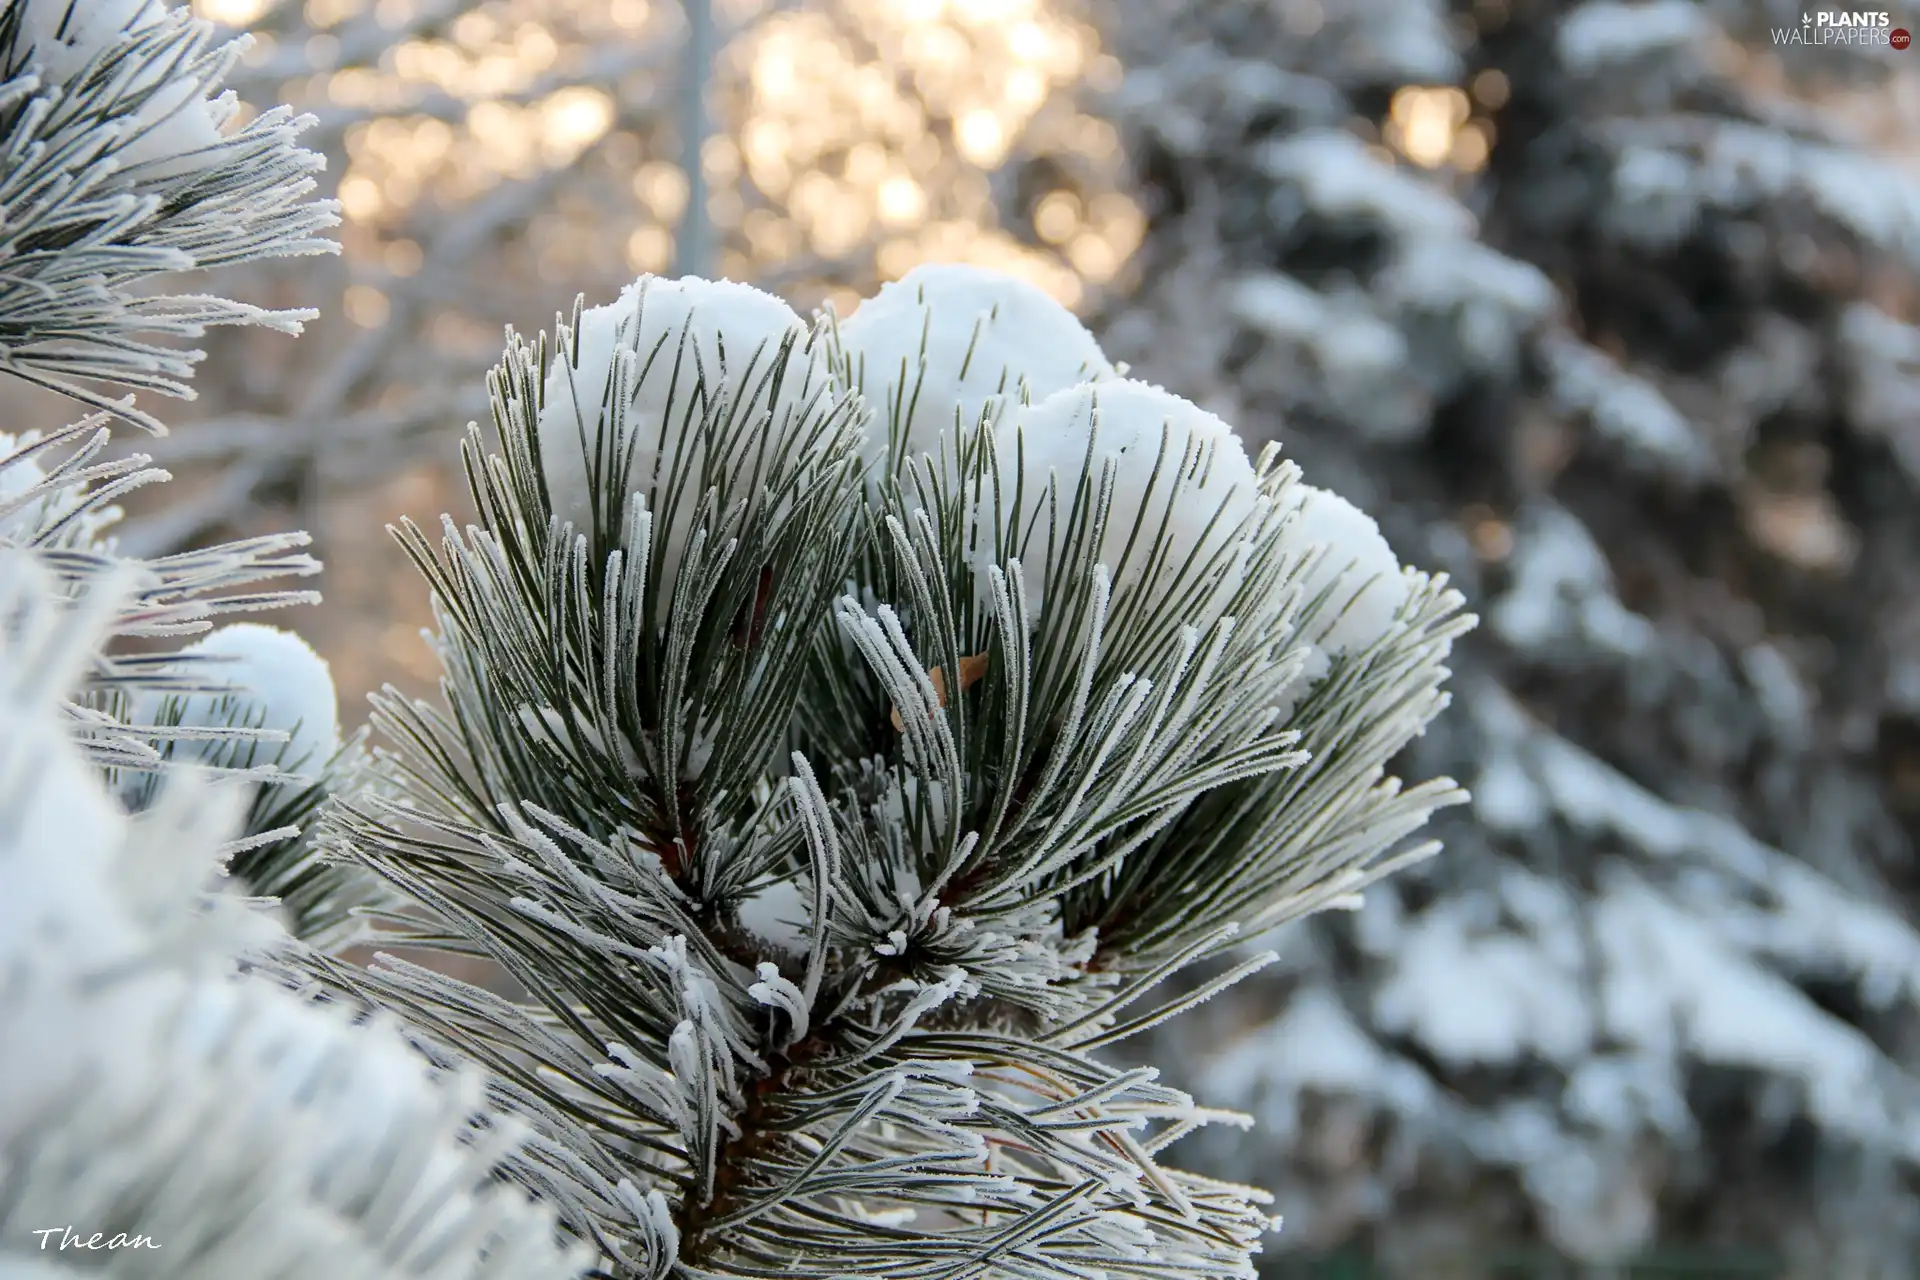 Frost, A snow-covered, pine